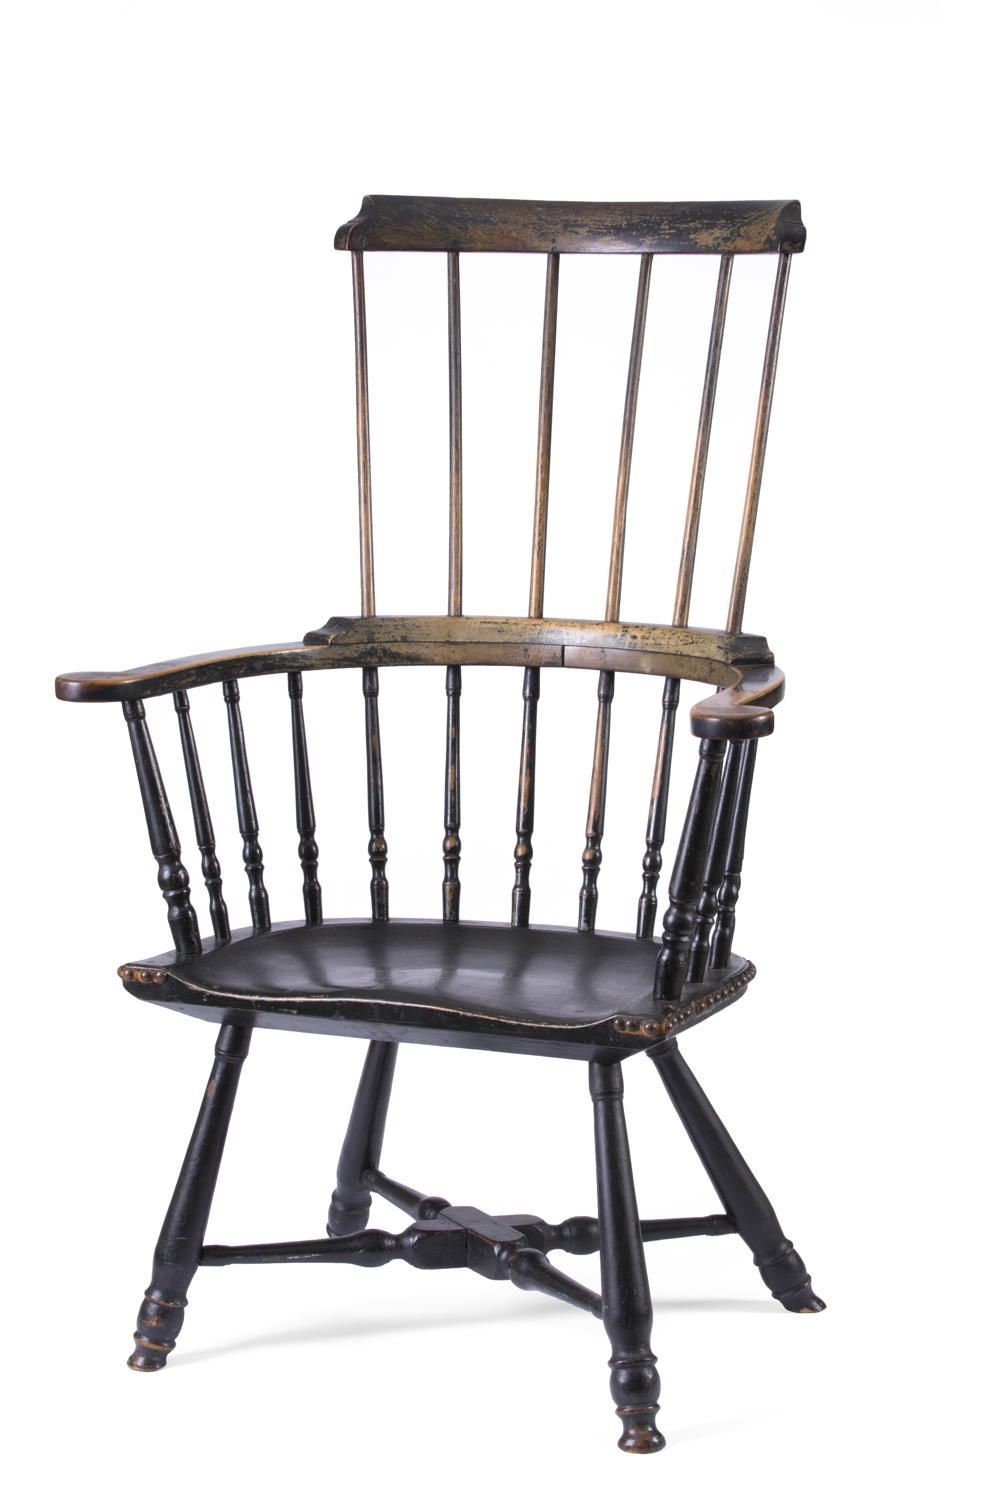 Newport, Rhode Island High Back Windsor Armchair, 1760 1770 In Black Back Windsor Rocking Chairs (View 16 of 20)